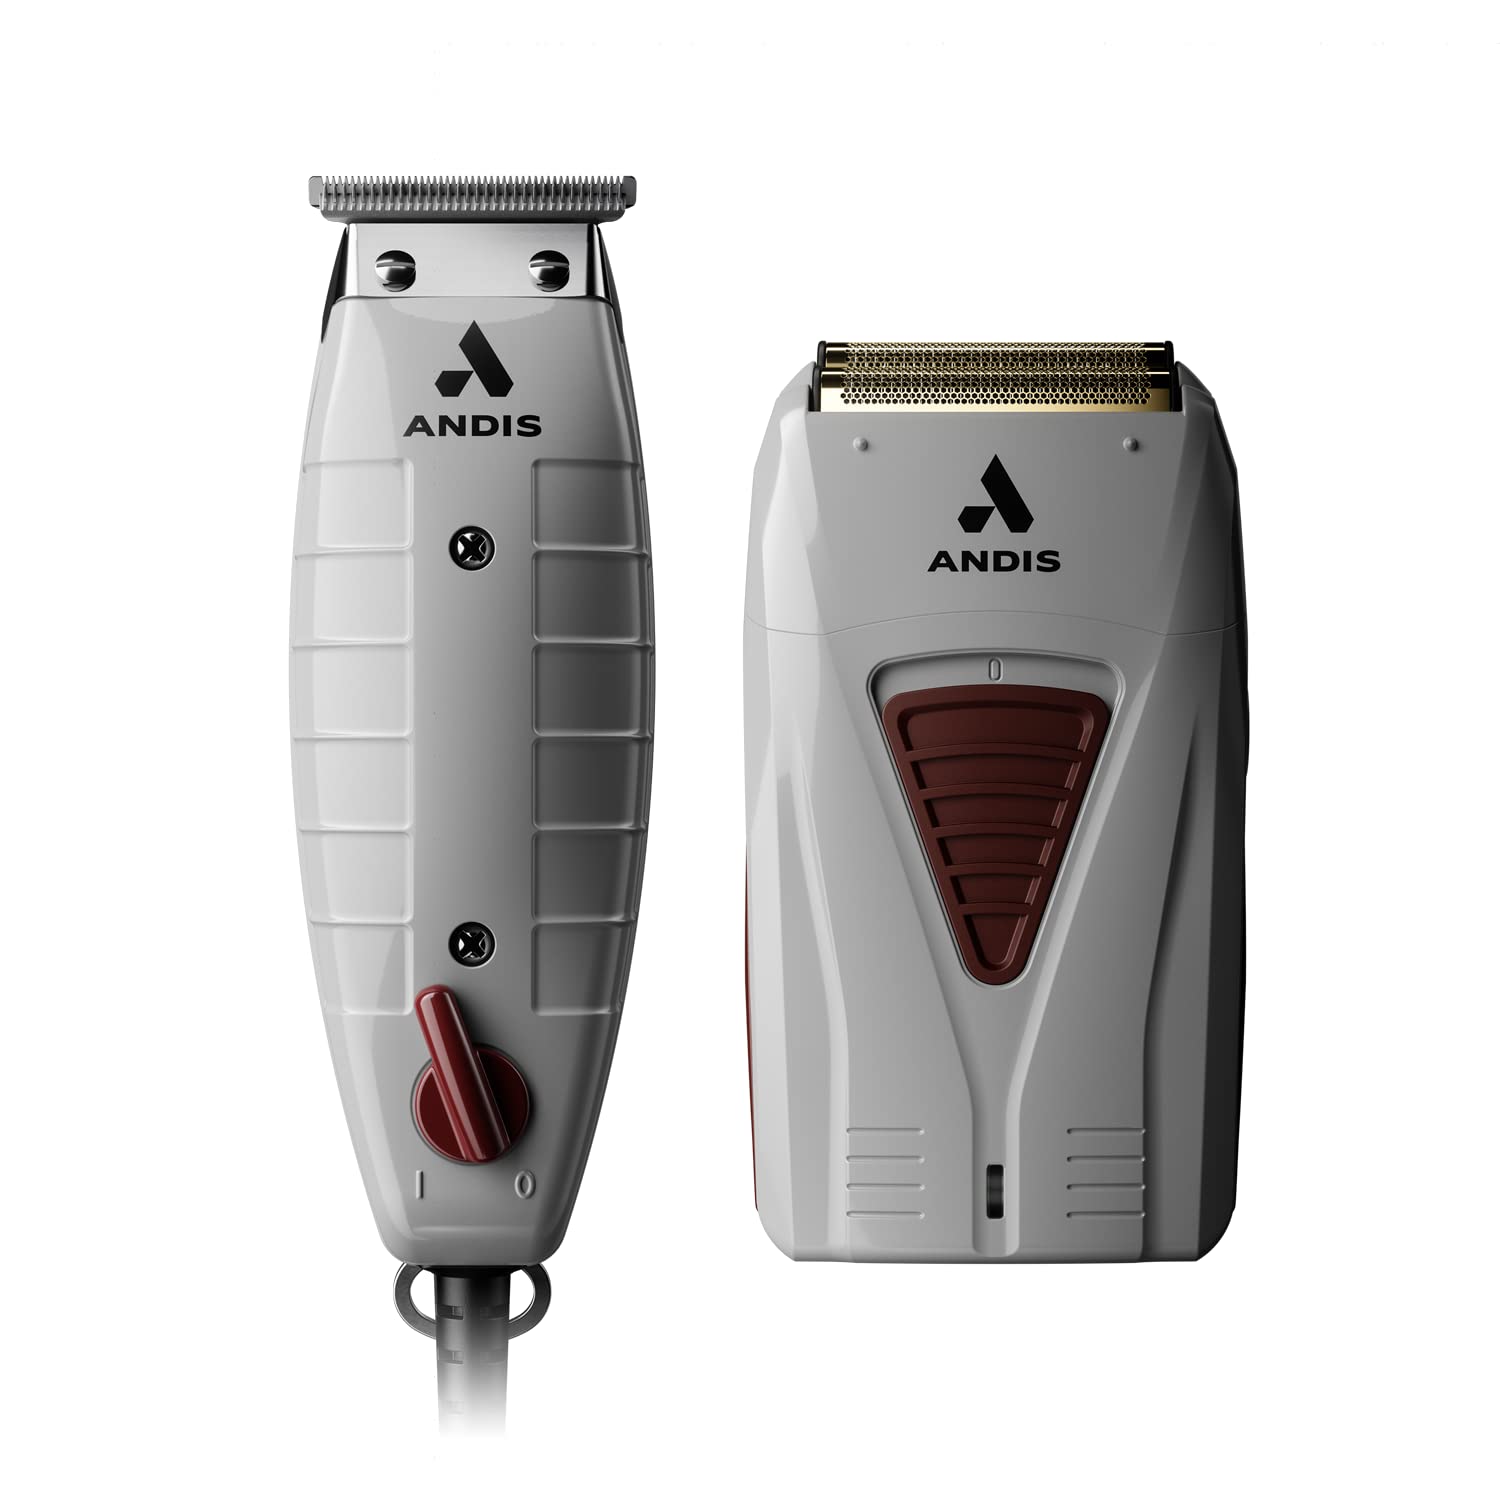 Andis 17270 Finishing Combo T-Outliner Trimmer & Pro Foil Lithium Titanium Foil Shaver - Professional Finishing Hair Clippers and Trimmer Kit for Men